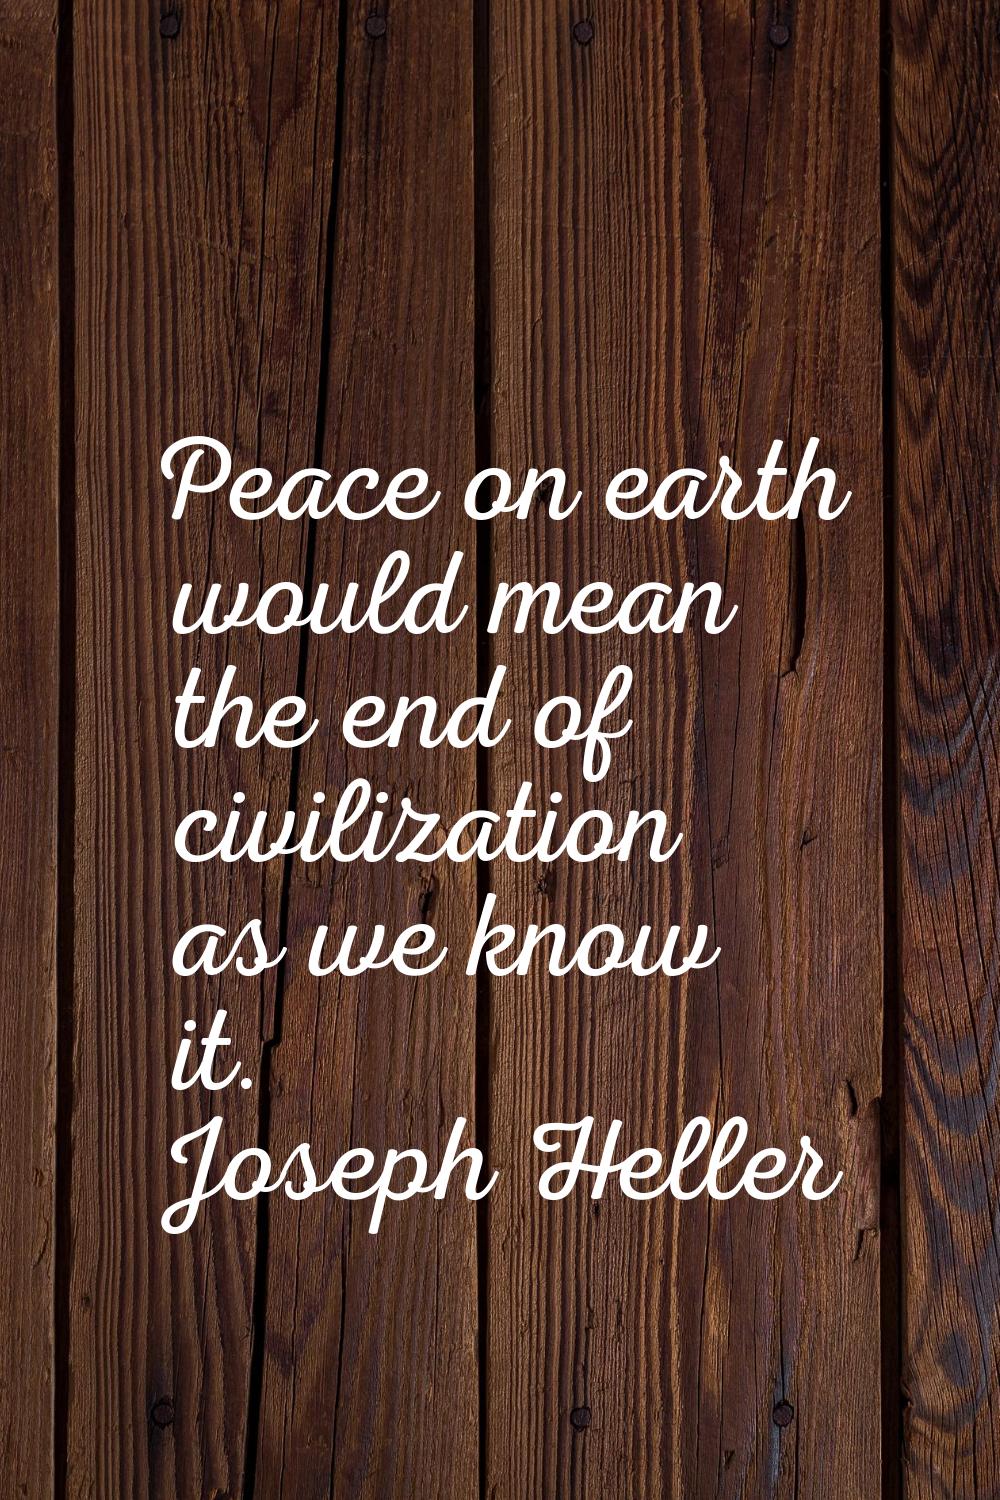 Peace on earth would mean the end of civilization as we know it.